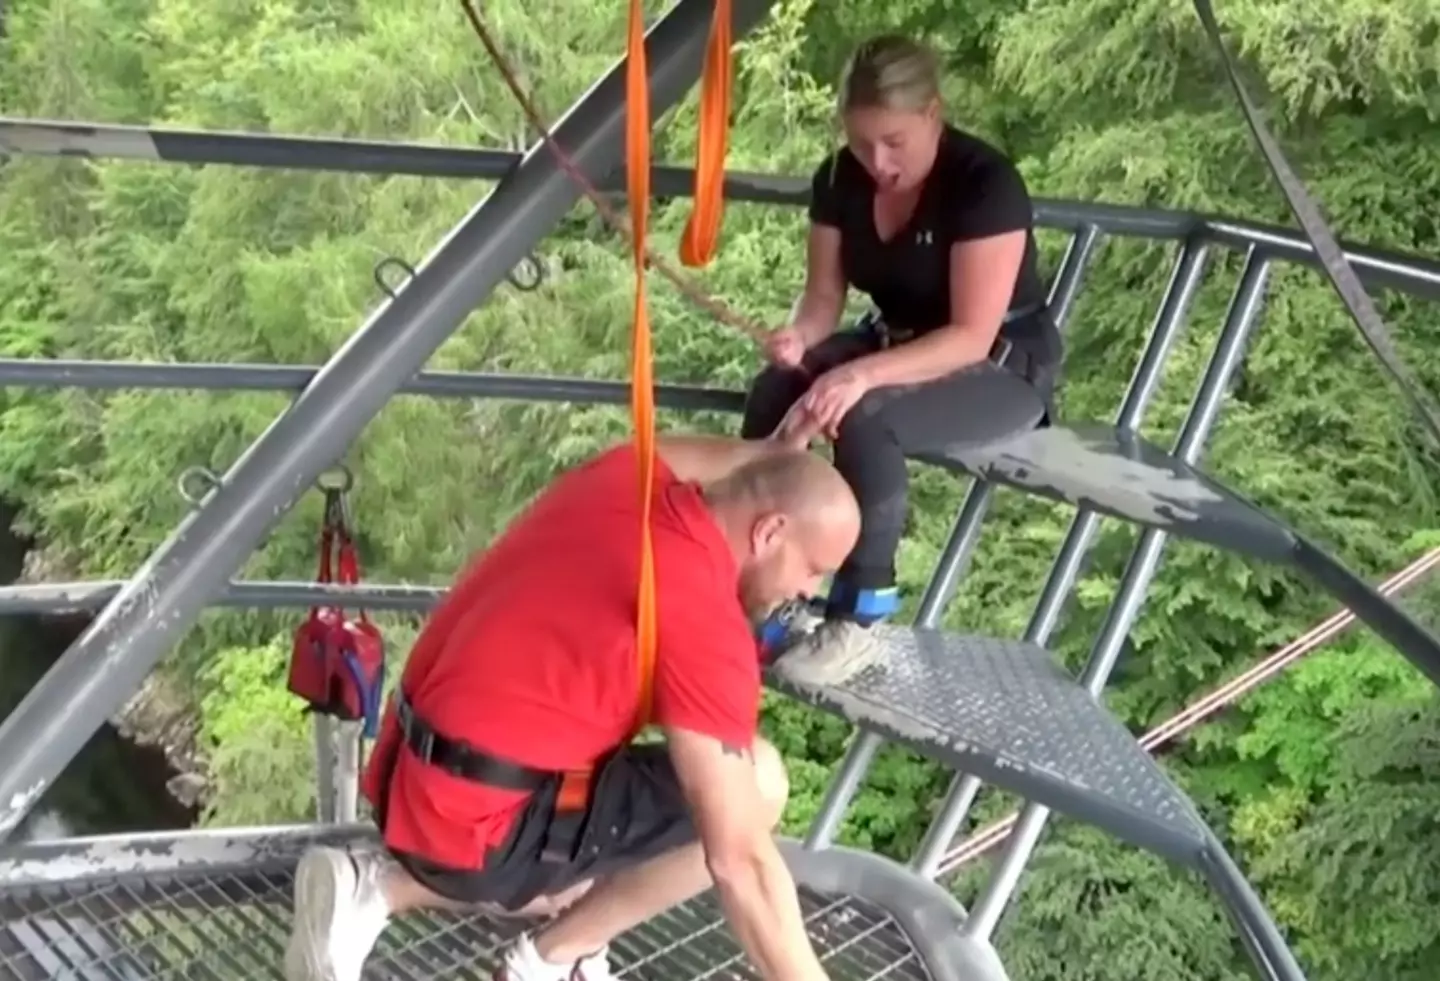 Marc proposed to his fiancée Gayle while bungee jumping.